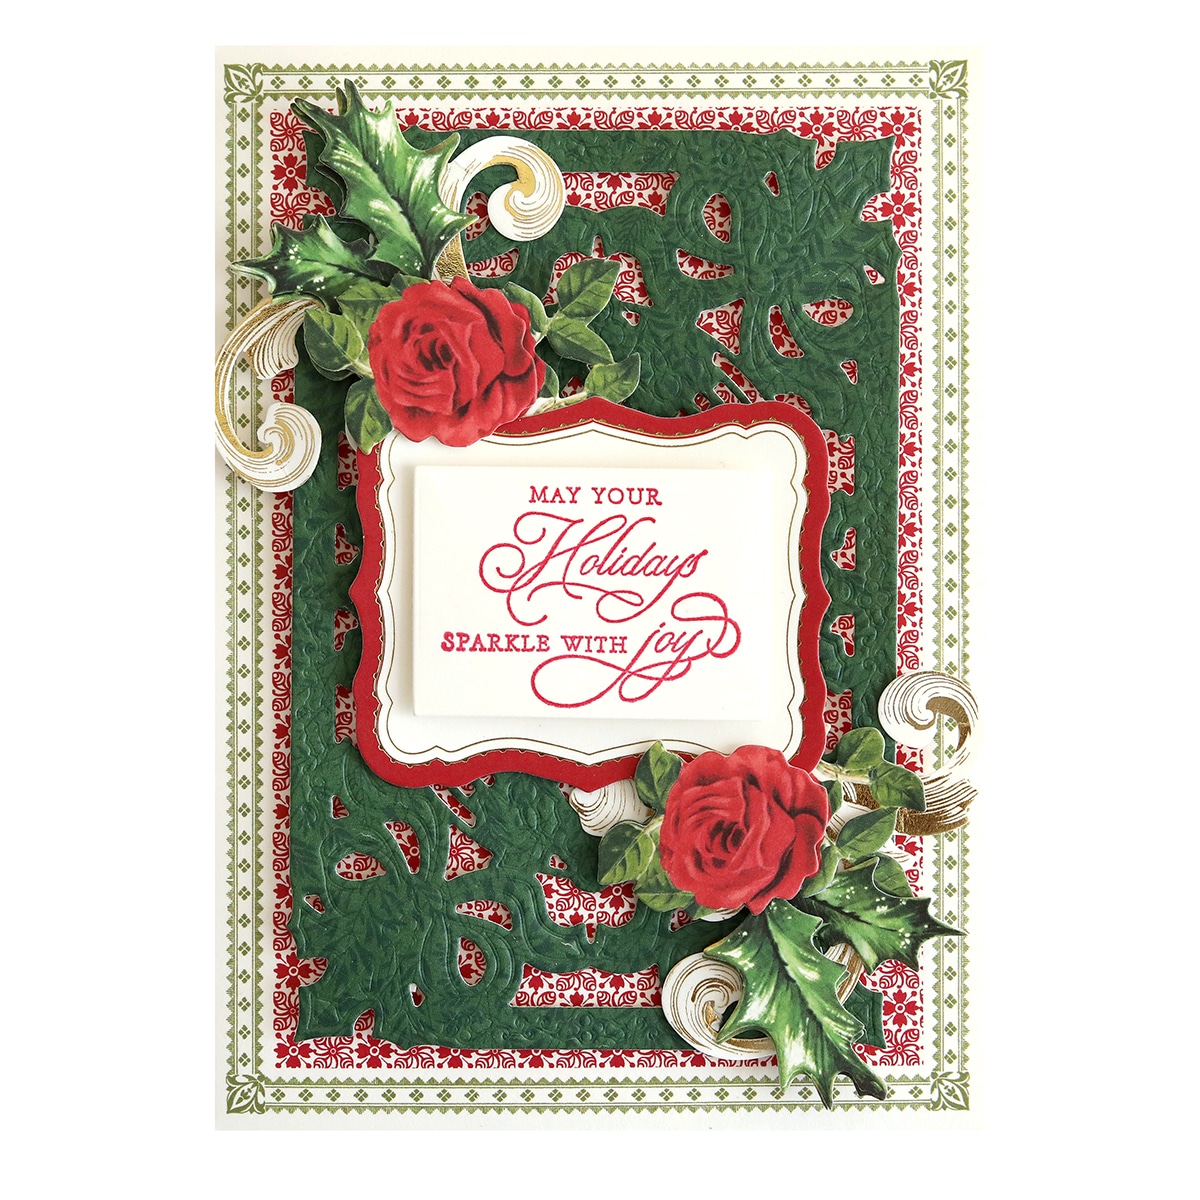 A christmas card with roses and holly.